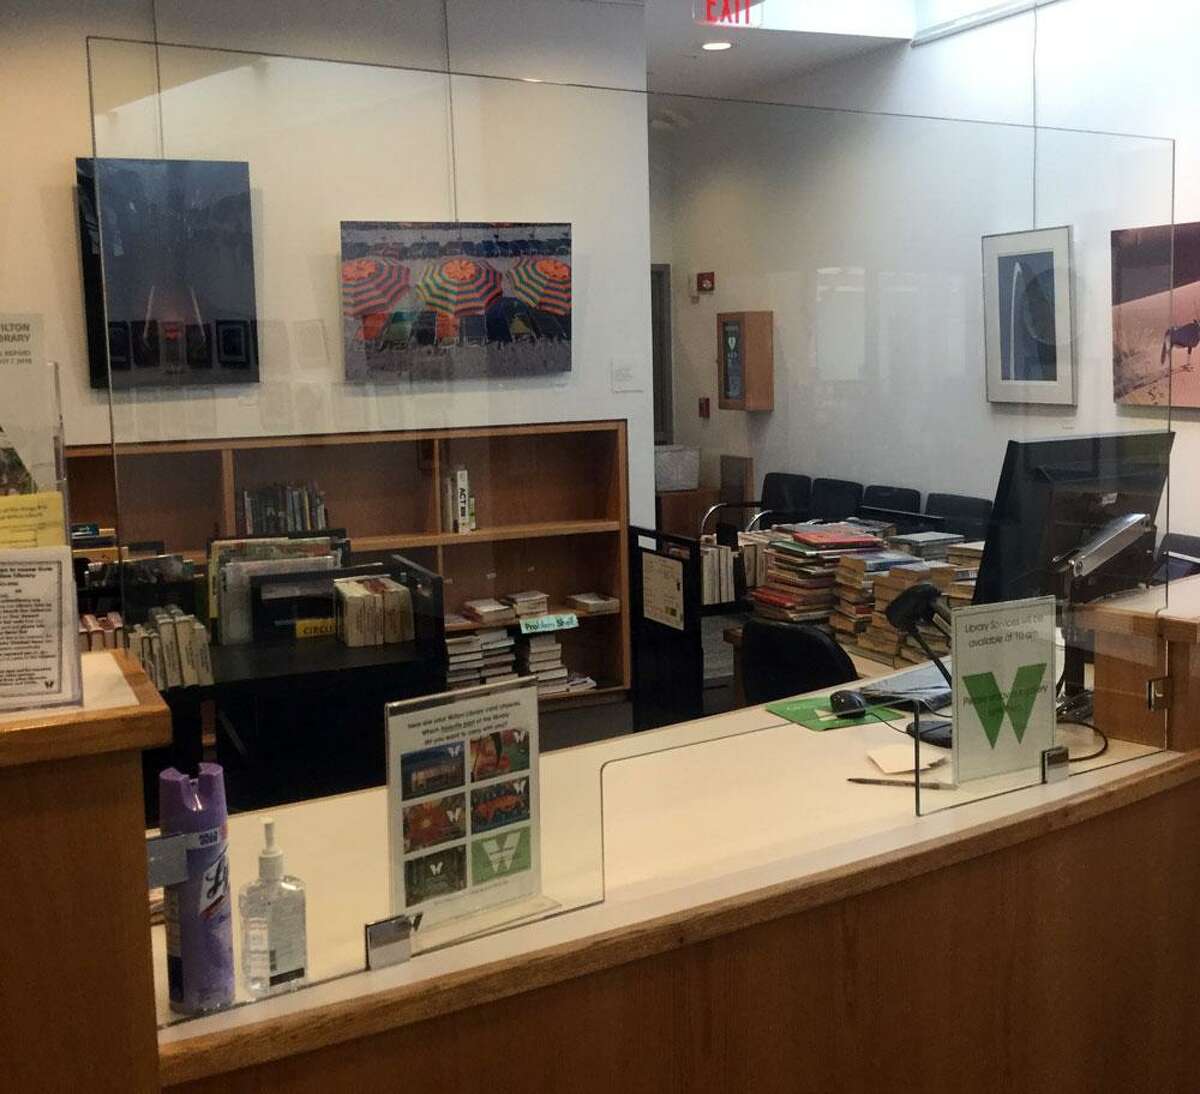 Wilton Library is opening its building to patrons for in-person express service appointments only beginning Monday, Sept. 28. Pictured: The library’s reconfigured circulation desk with protective glass shields for patron and staff safety.